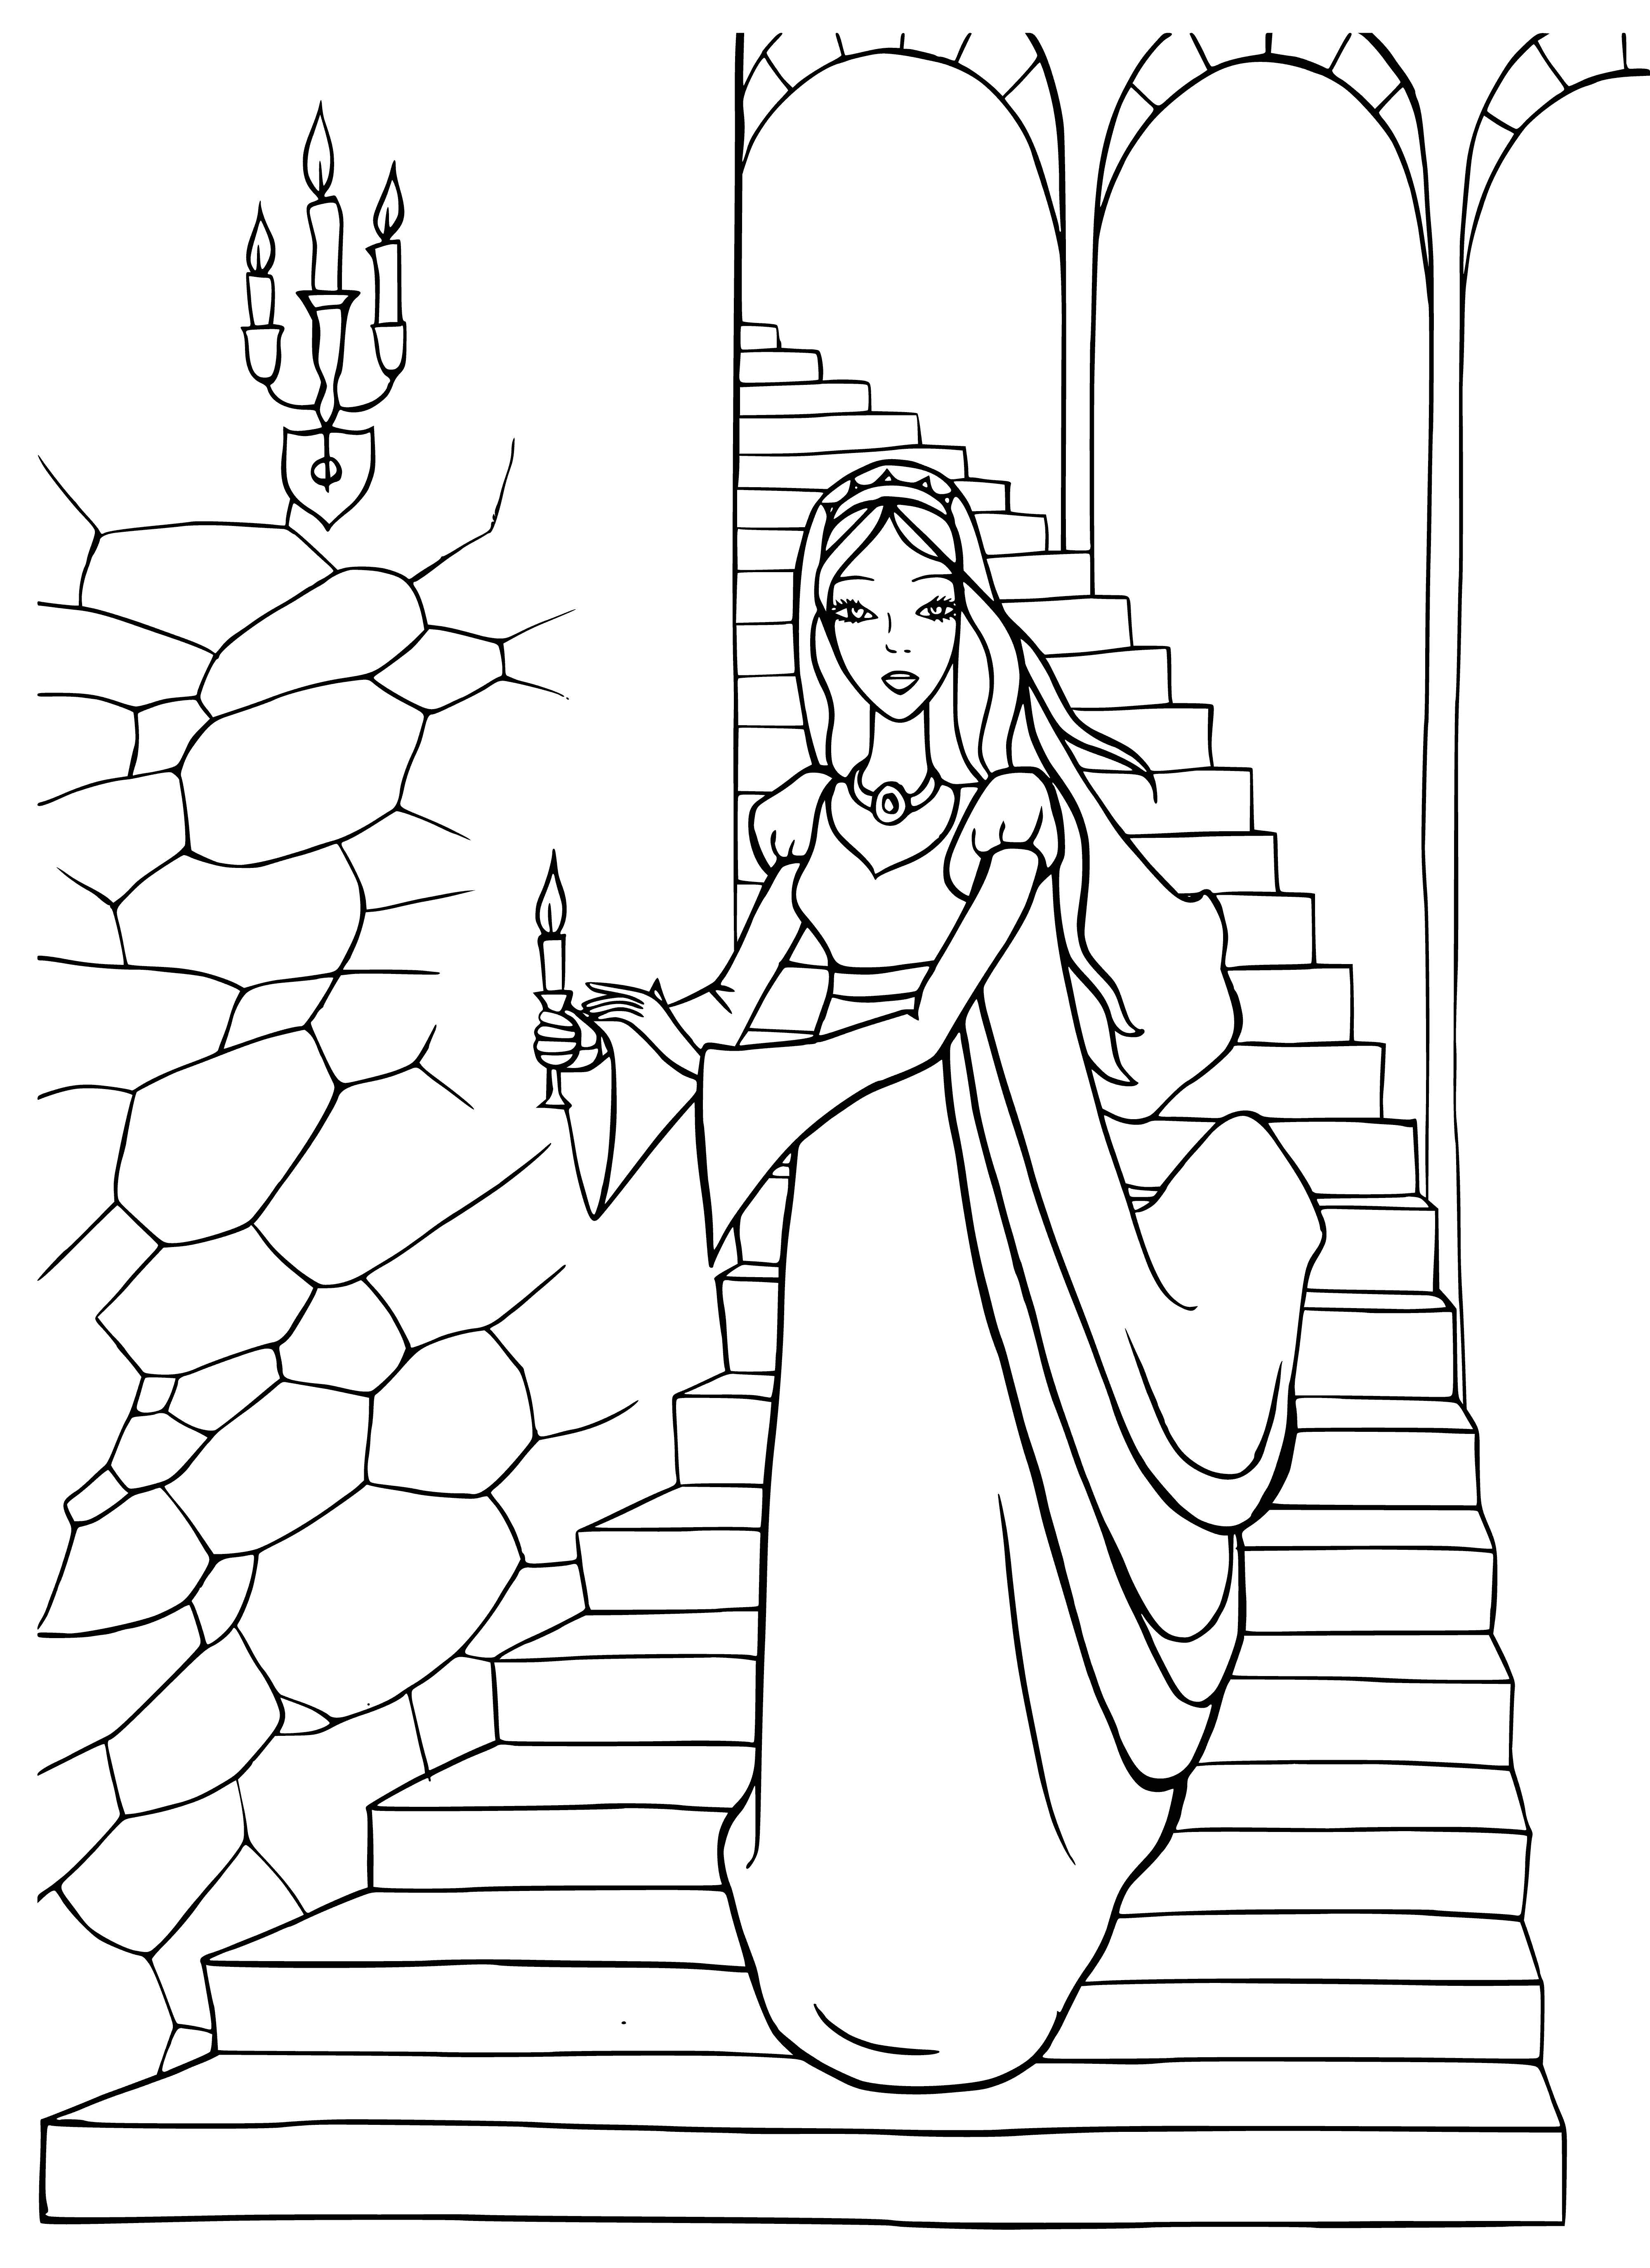 coloring page: Beautiful princess rules Fairy kingdom, creating a loving environment where everyone works together, with celebrations held regularly. She is beloved by all.